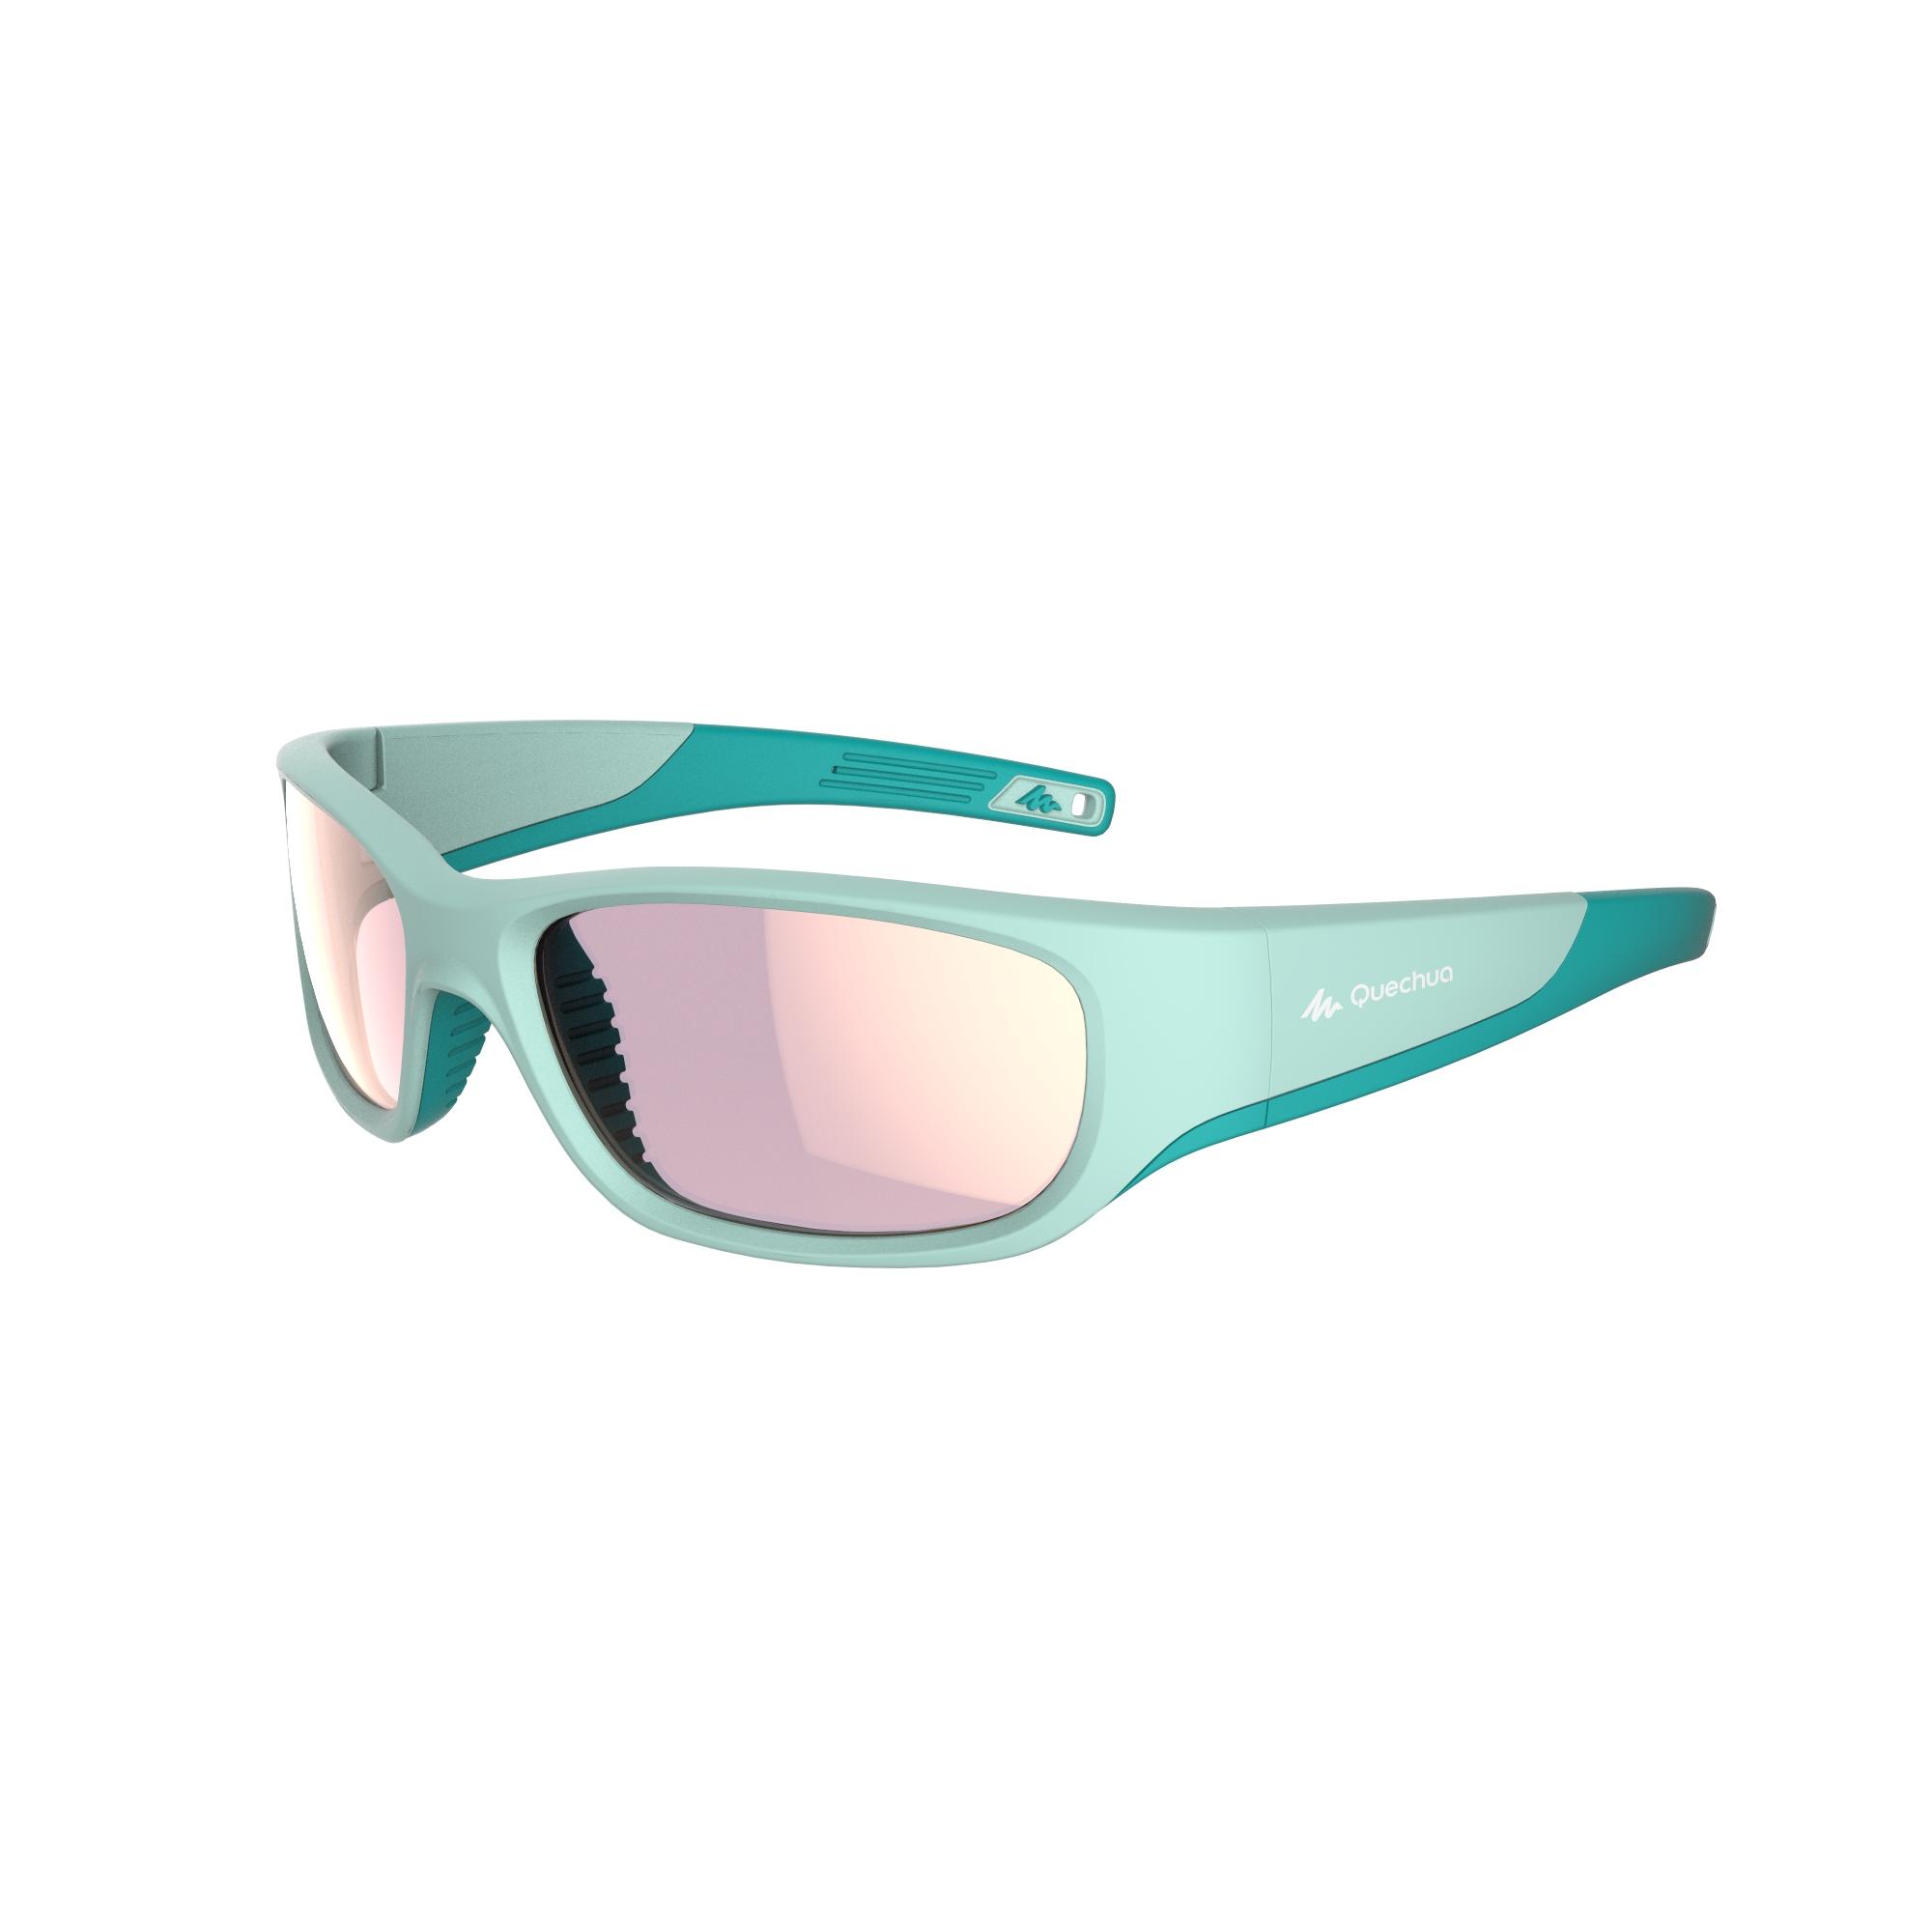 QUECHUA MH T 900 Children Hiking Sunglasses Ages 9-11 Category 4 - Turquoise